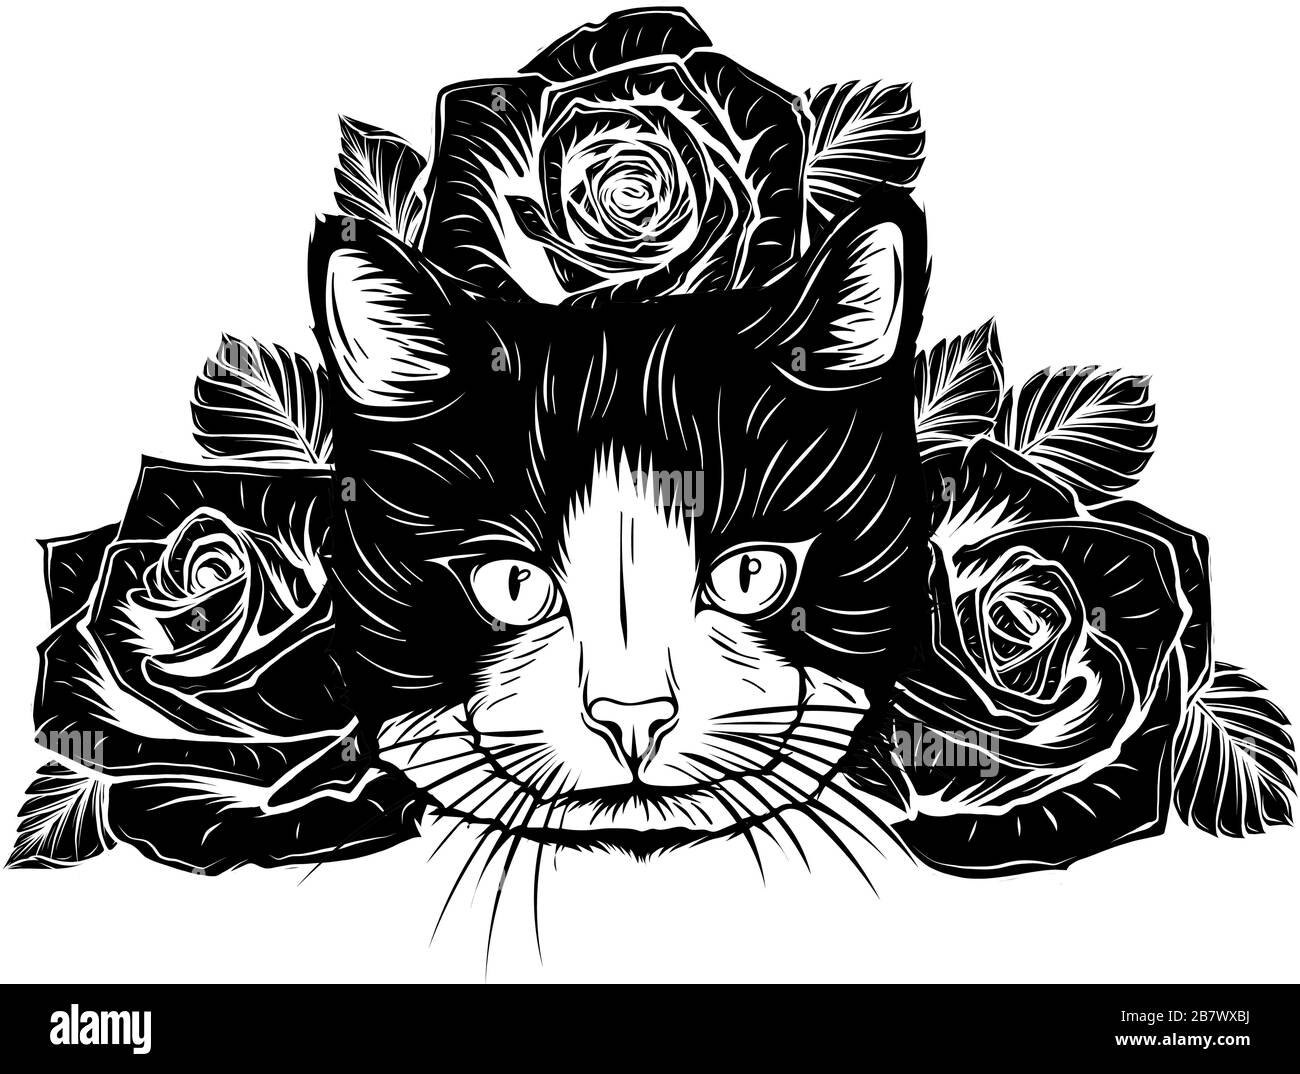 cartoon fluffy cat with roses. Siamese cat with open eyes and flowers. Stock Vector